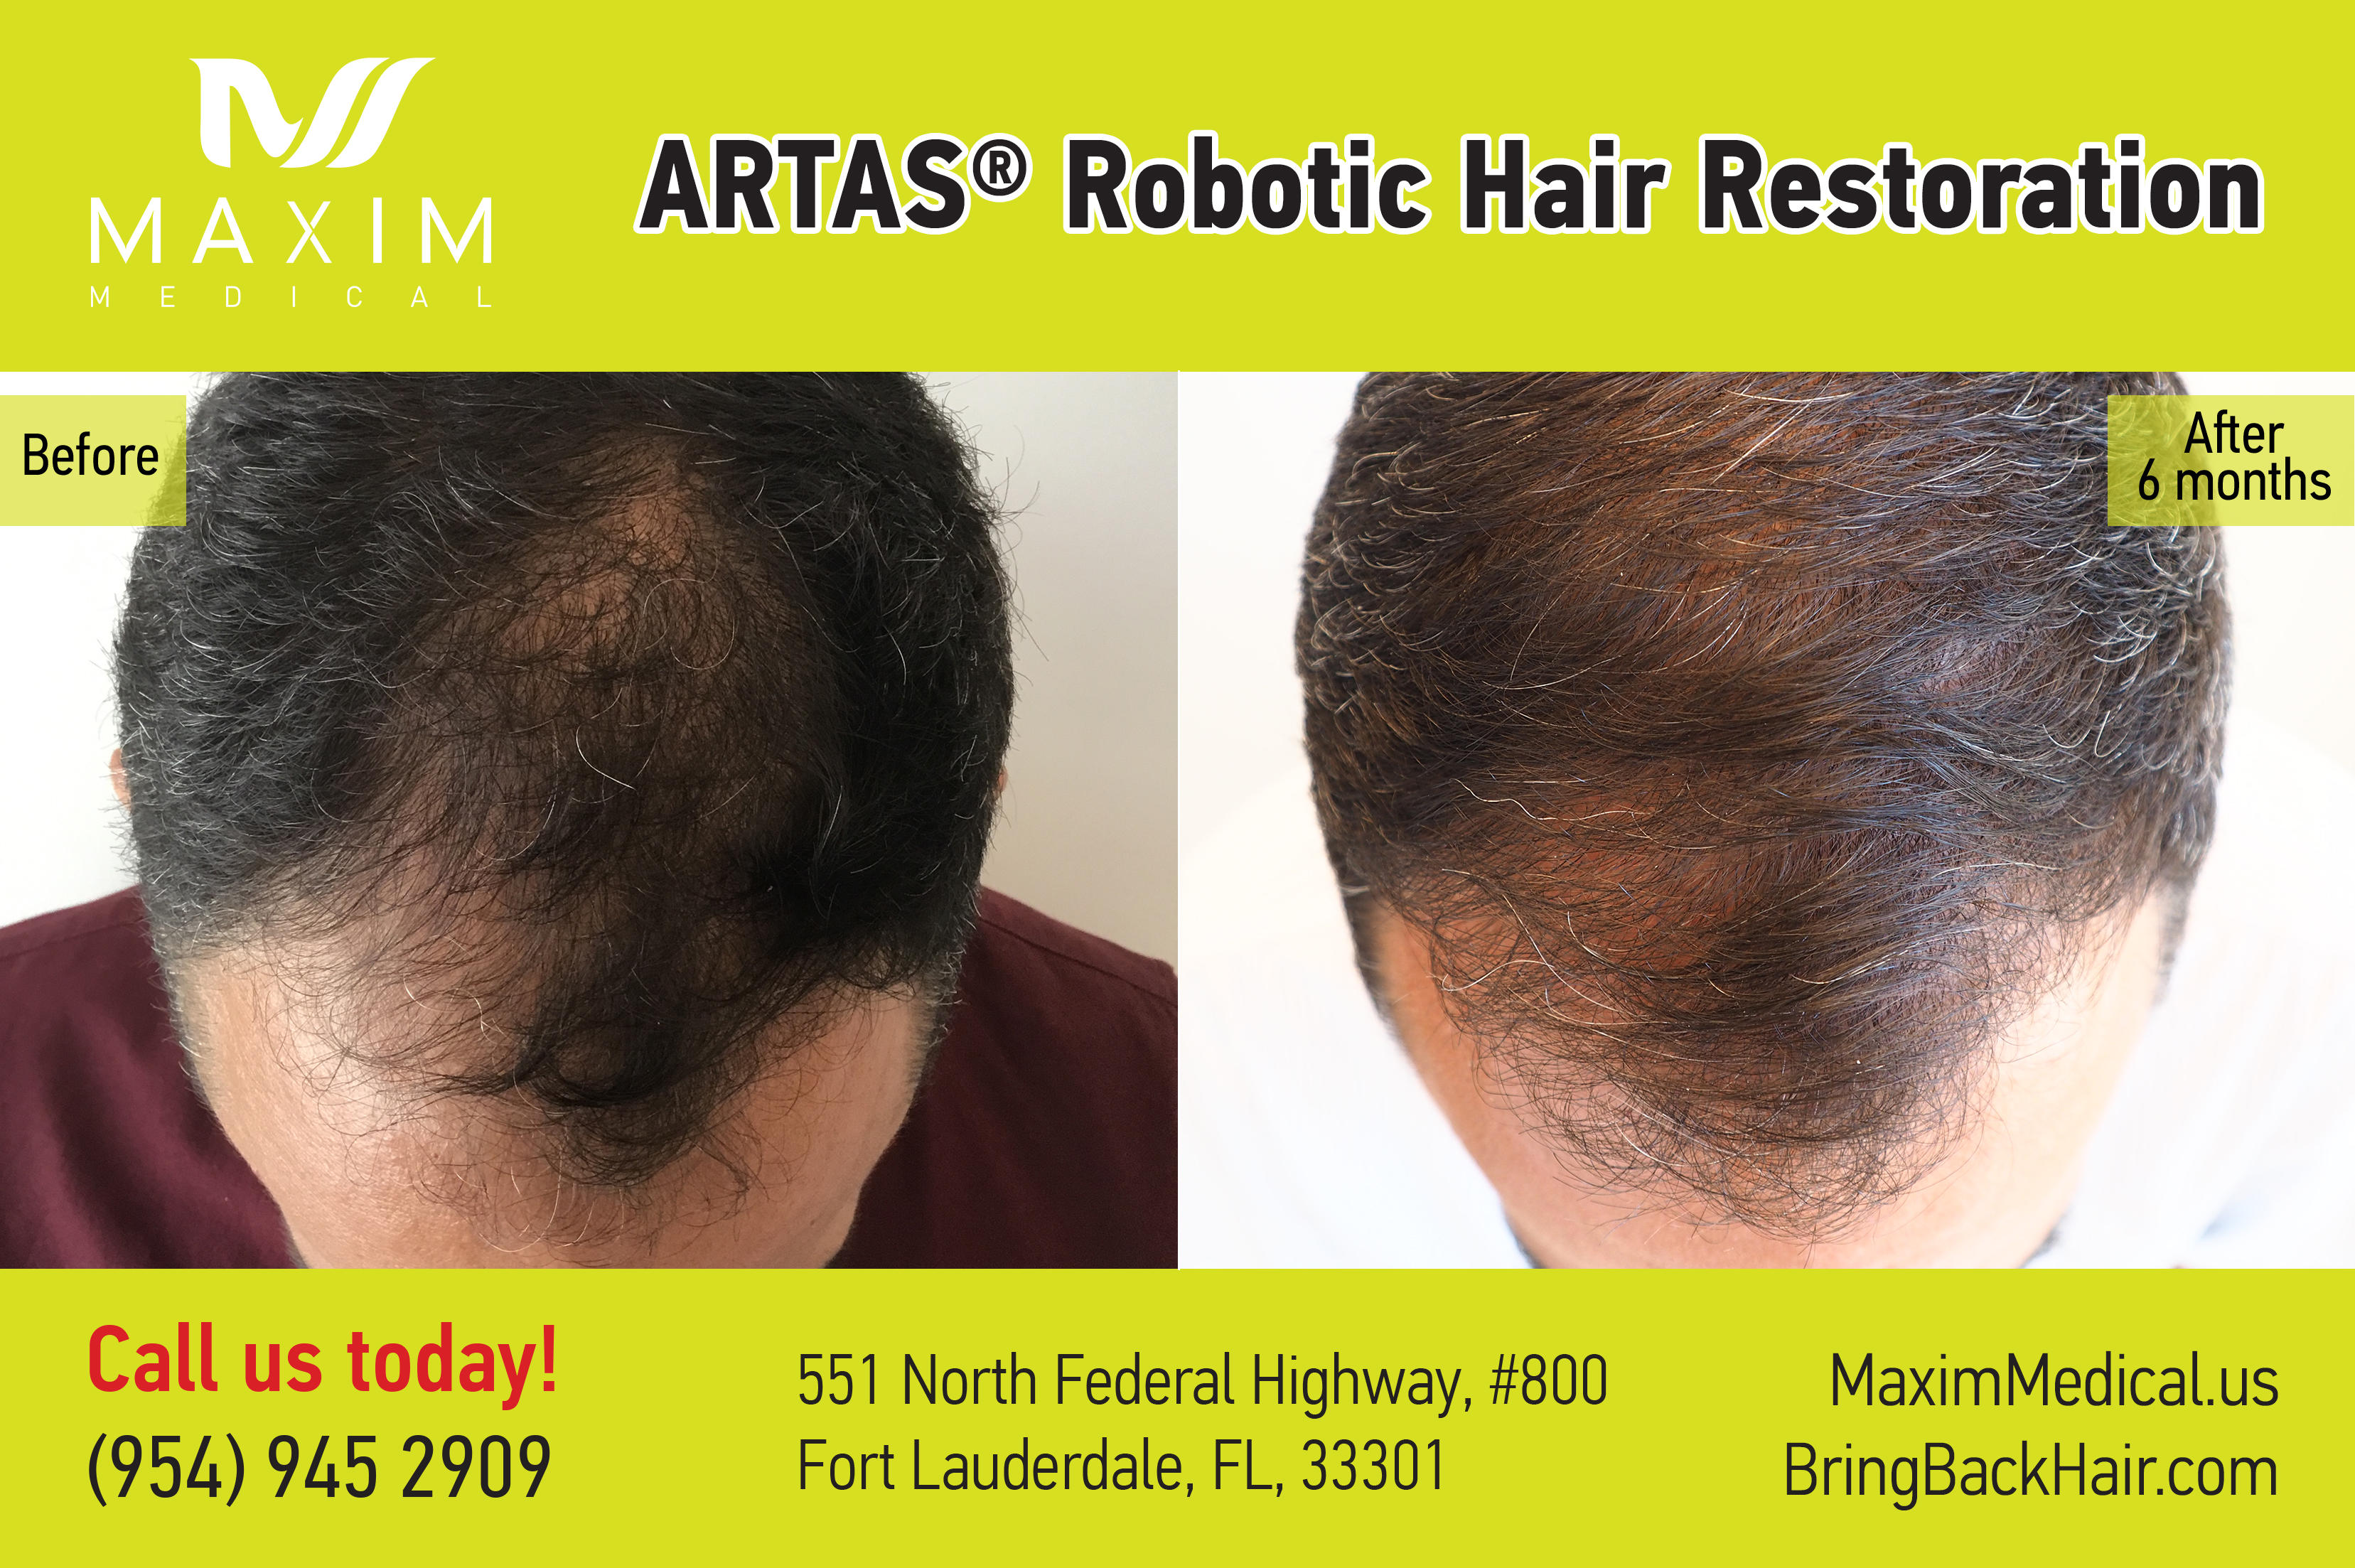 Before&After ARTAS robotic hair transplant surgery. 
Real people - real results!